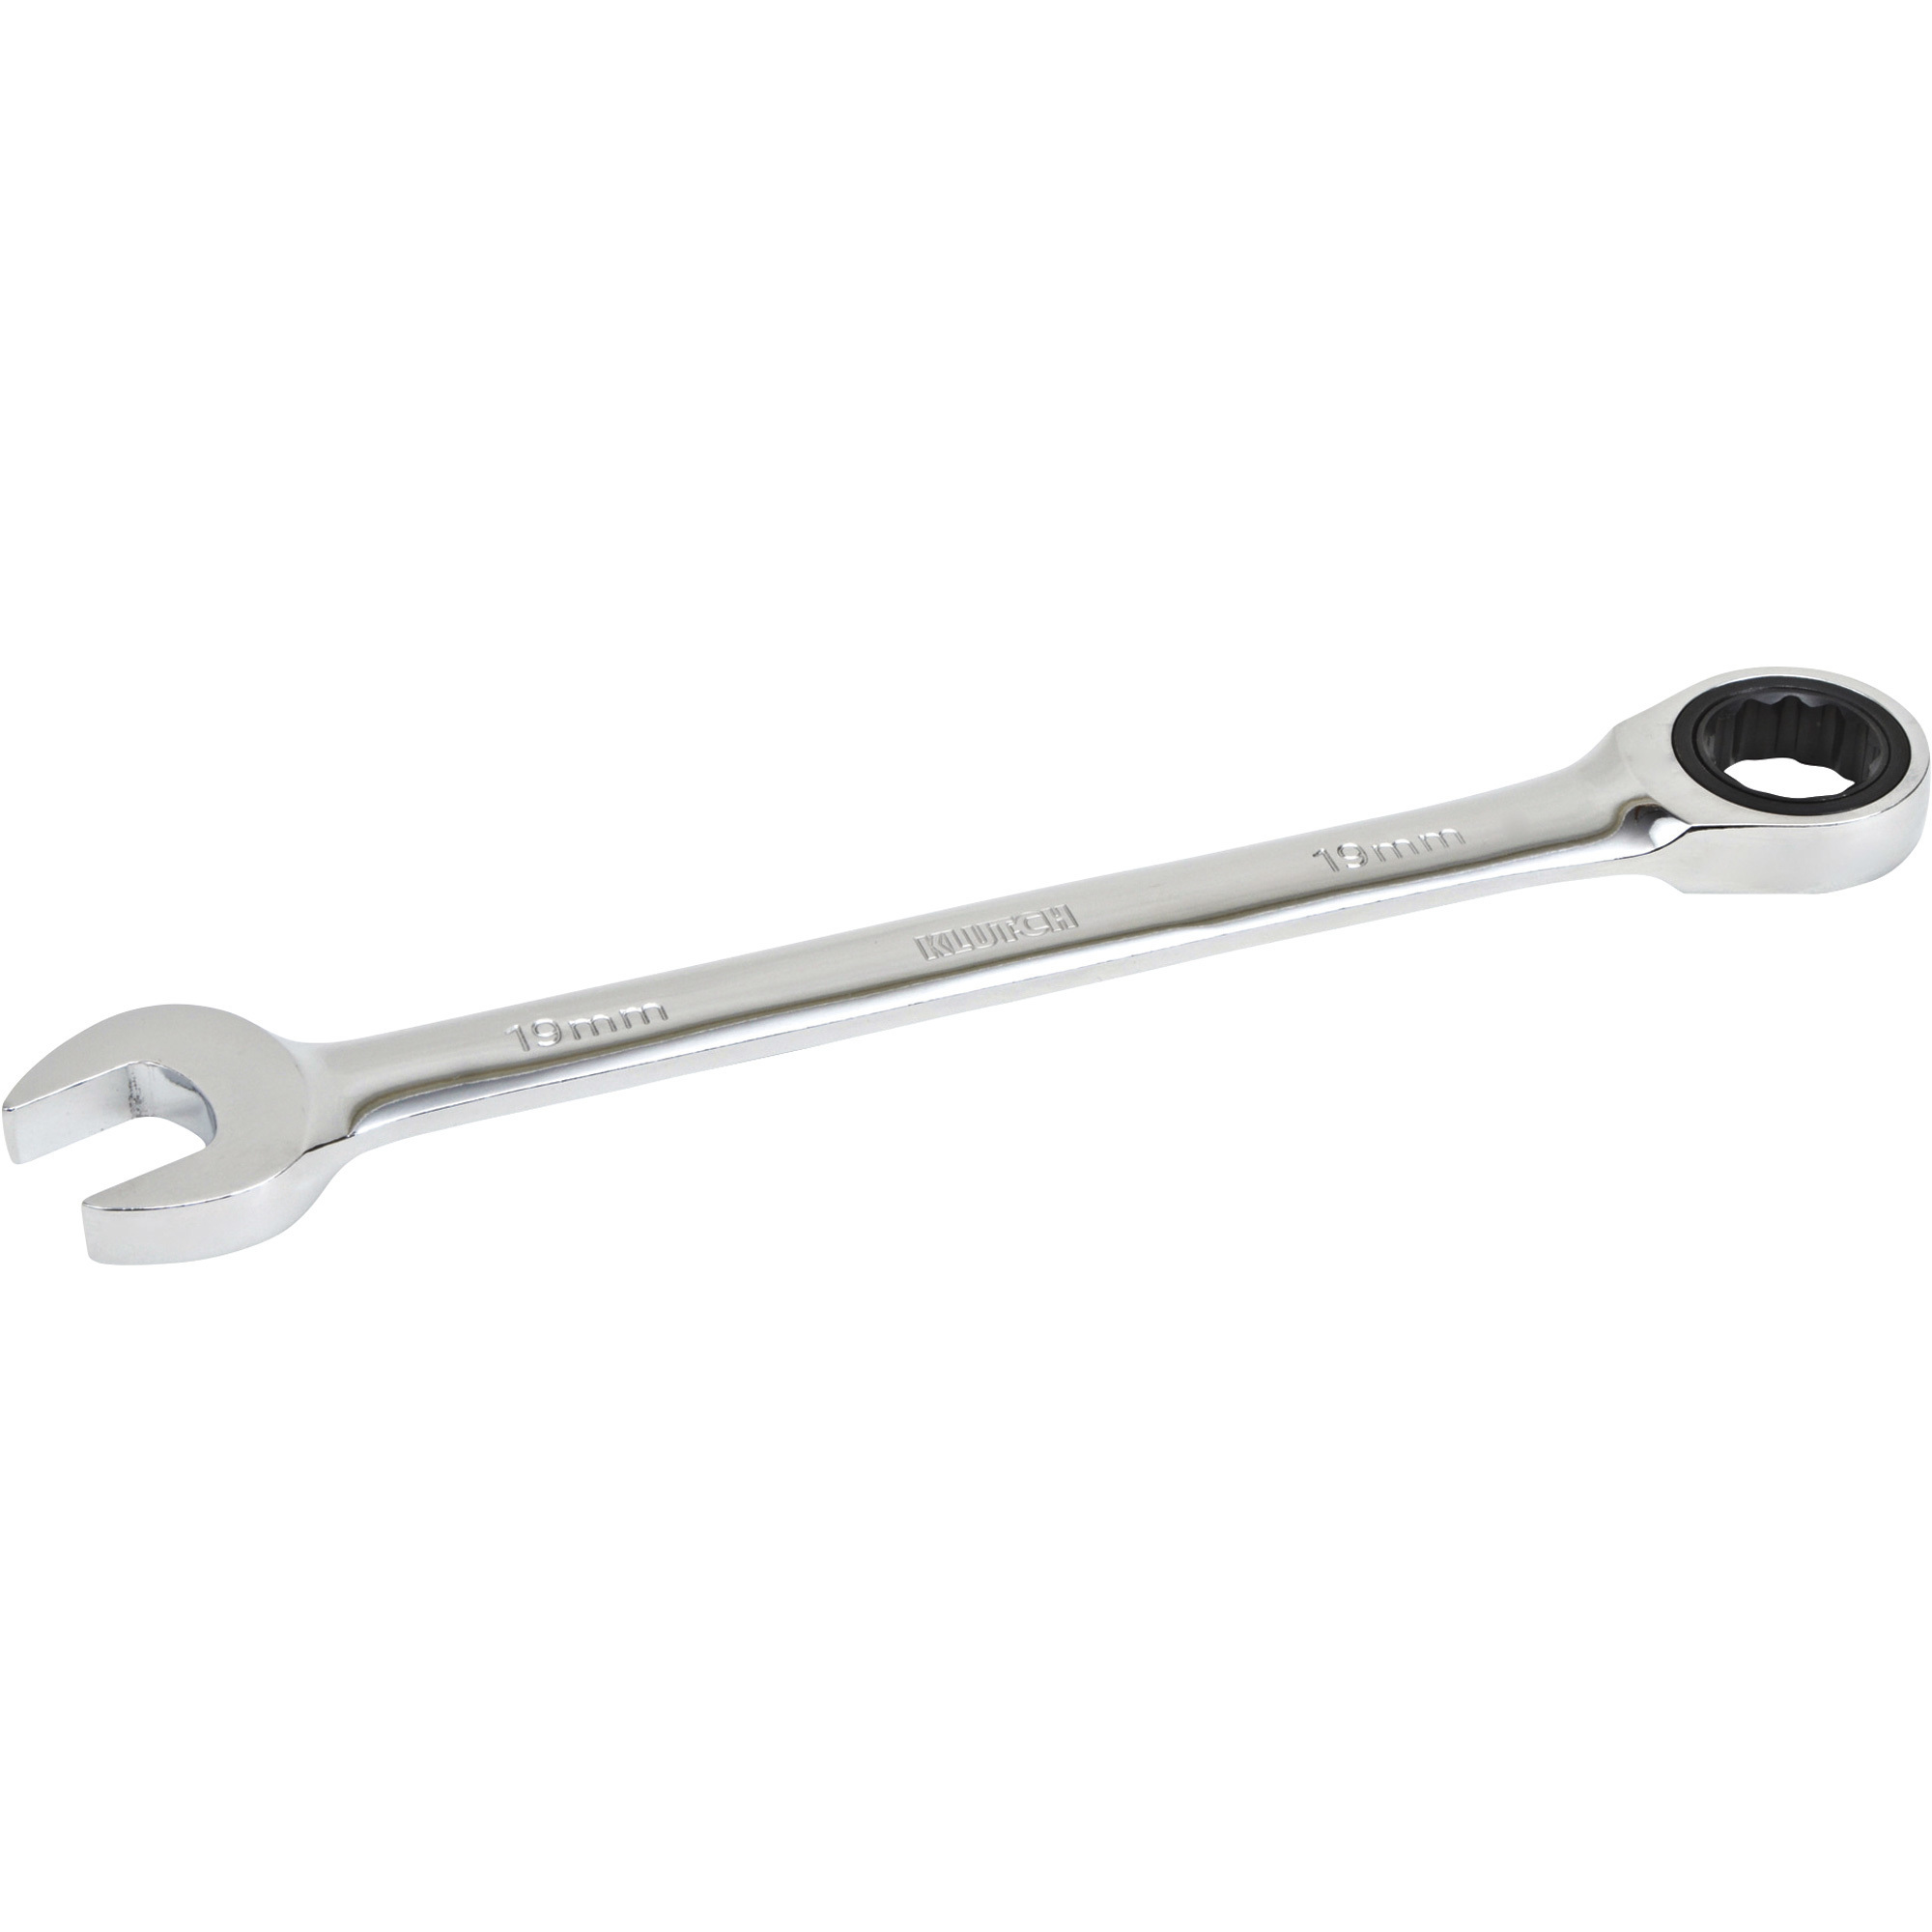 Klutch Ratcheting Wrench, Metric, 19mm